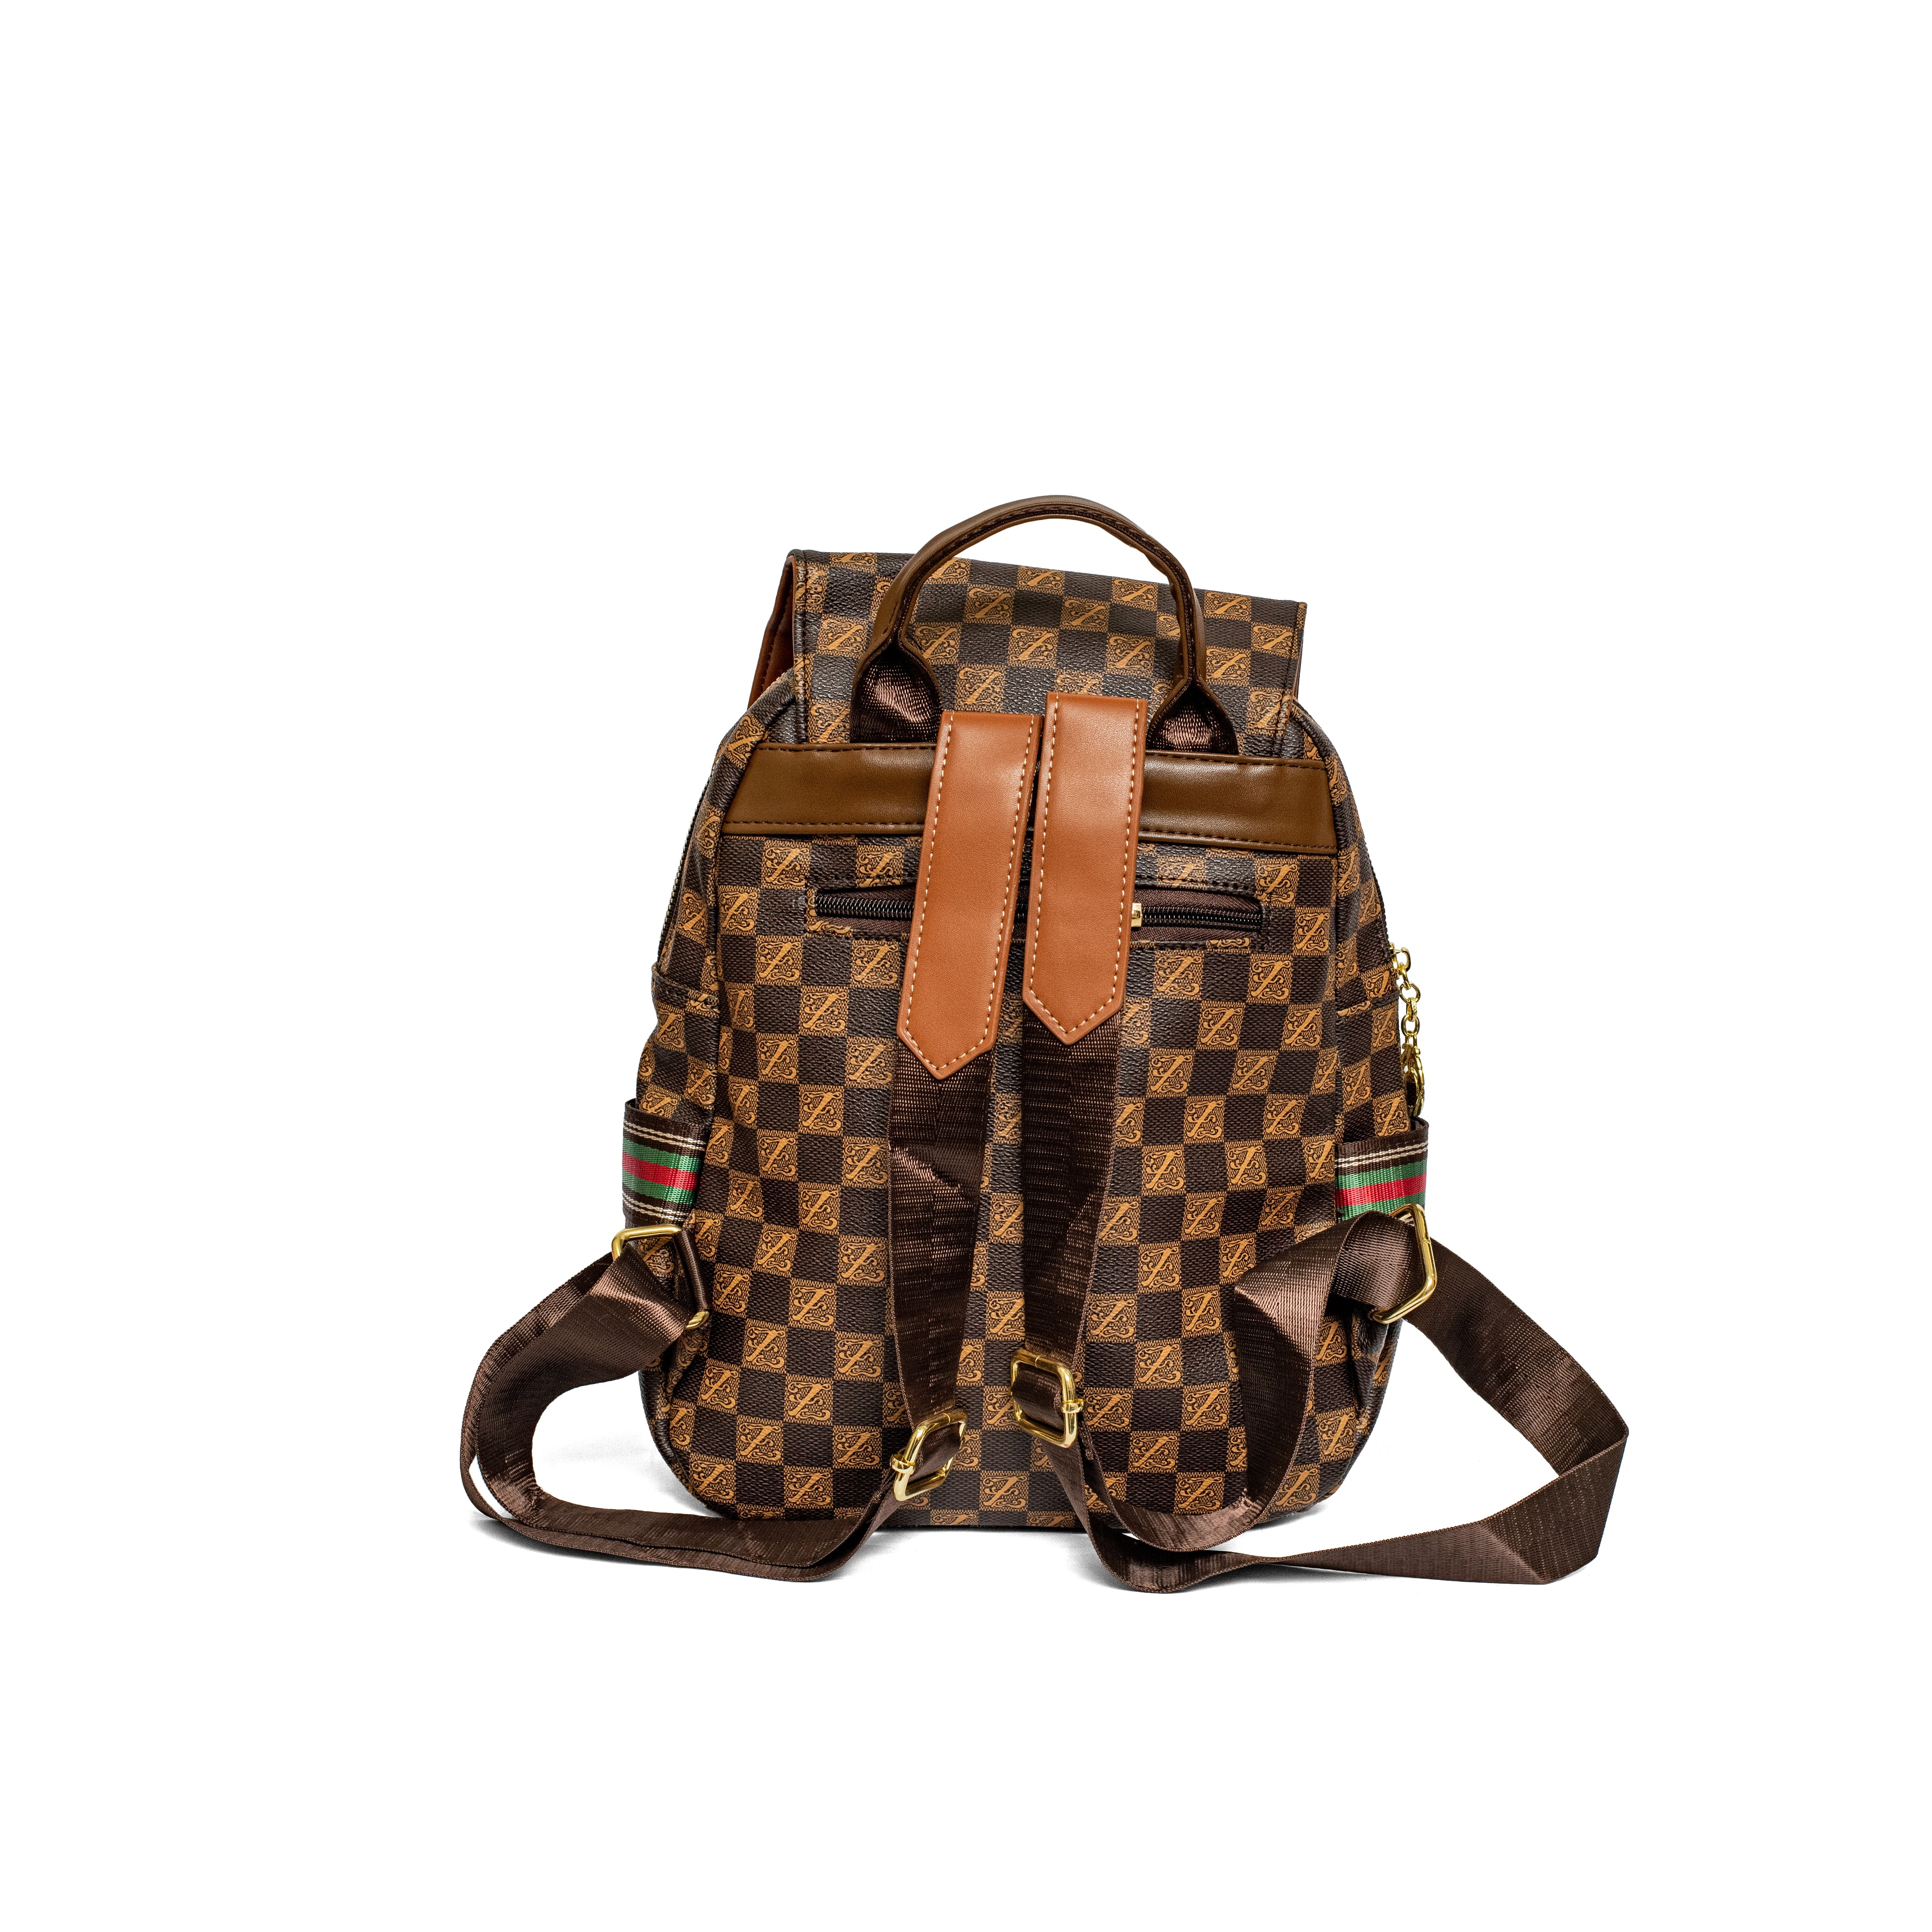 Vuitton Back pack